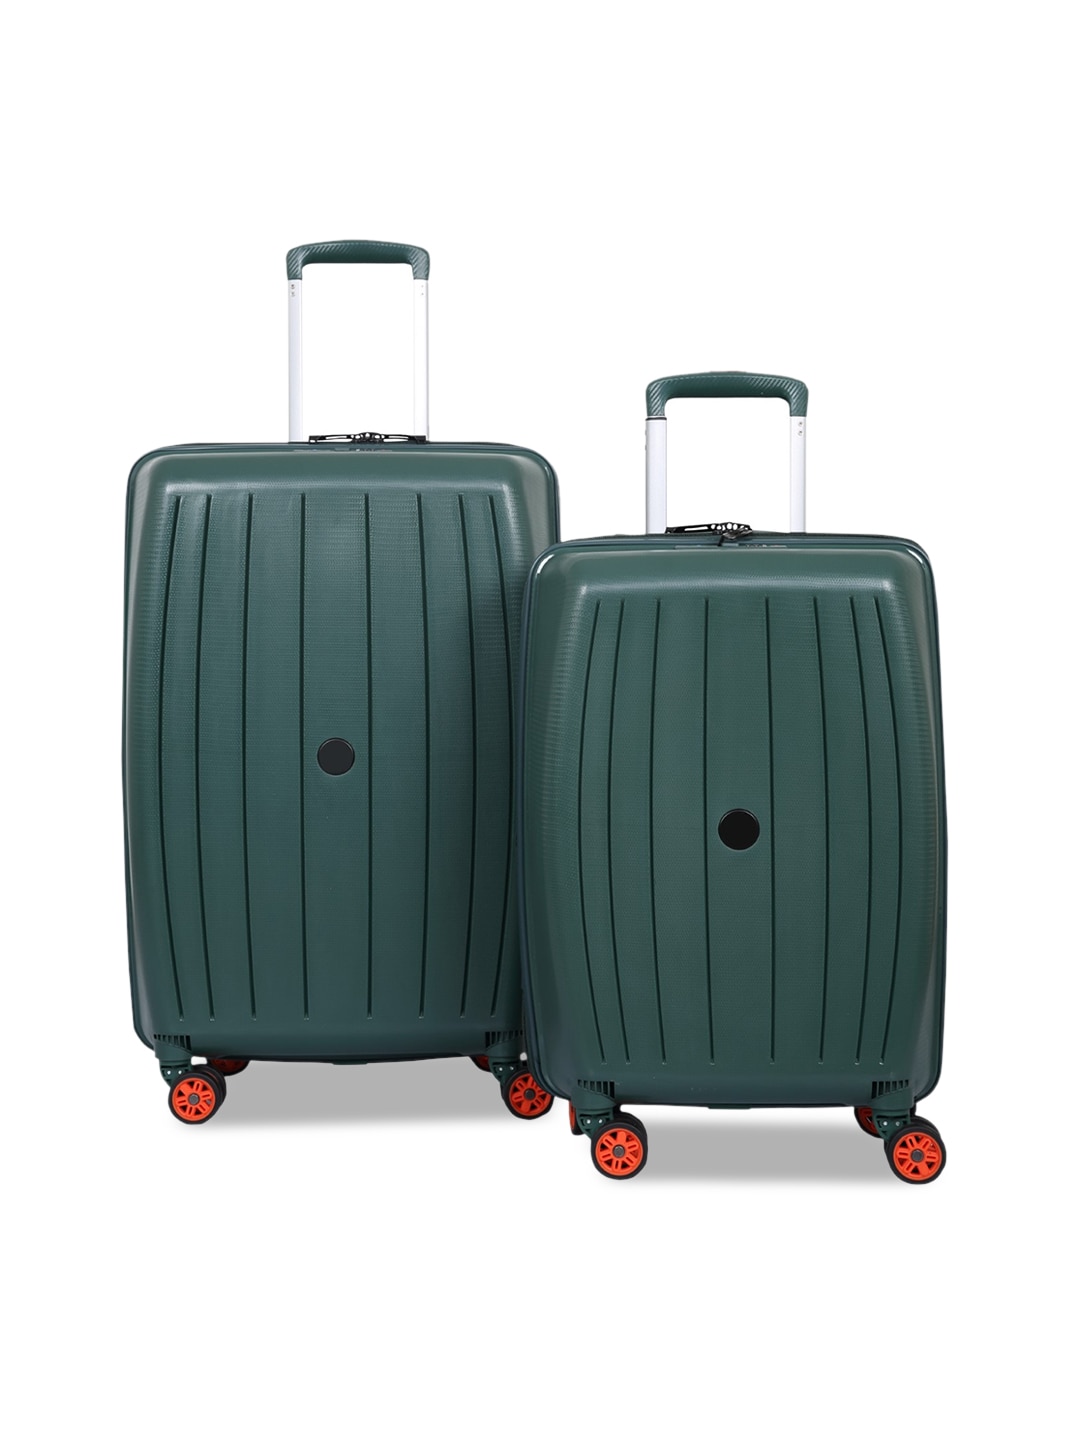 Polo Class Adults Set of 2 Green Solid Hard Sided Trolley Suitcase- 24 & 28 inch Price in India